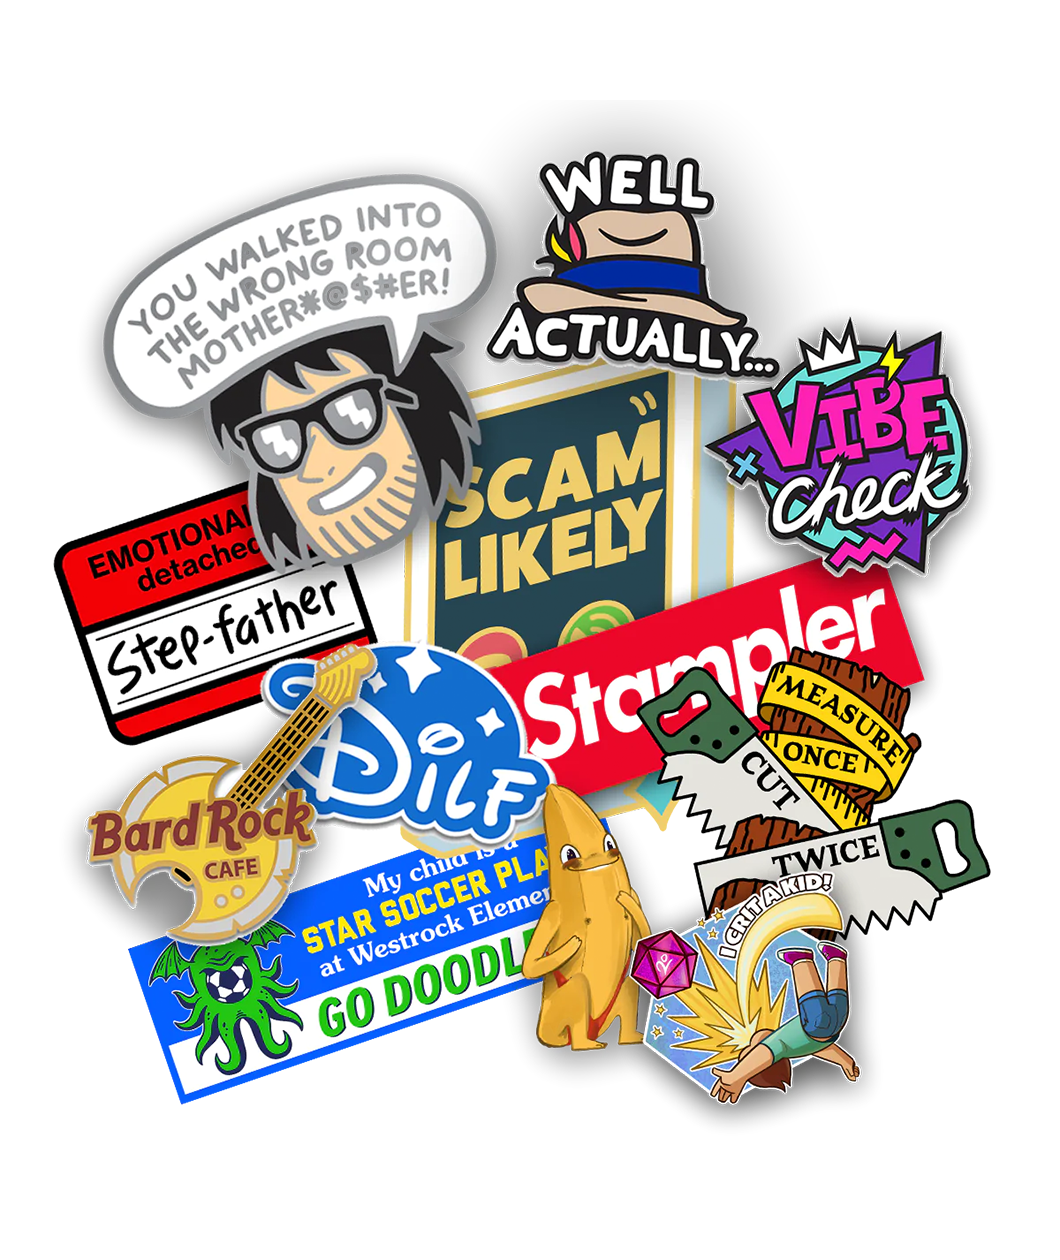 A collection of different possible stickers the customer could receive. All from previous sticker packs that have been released by Dungeons & Daddies.